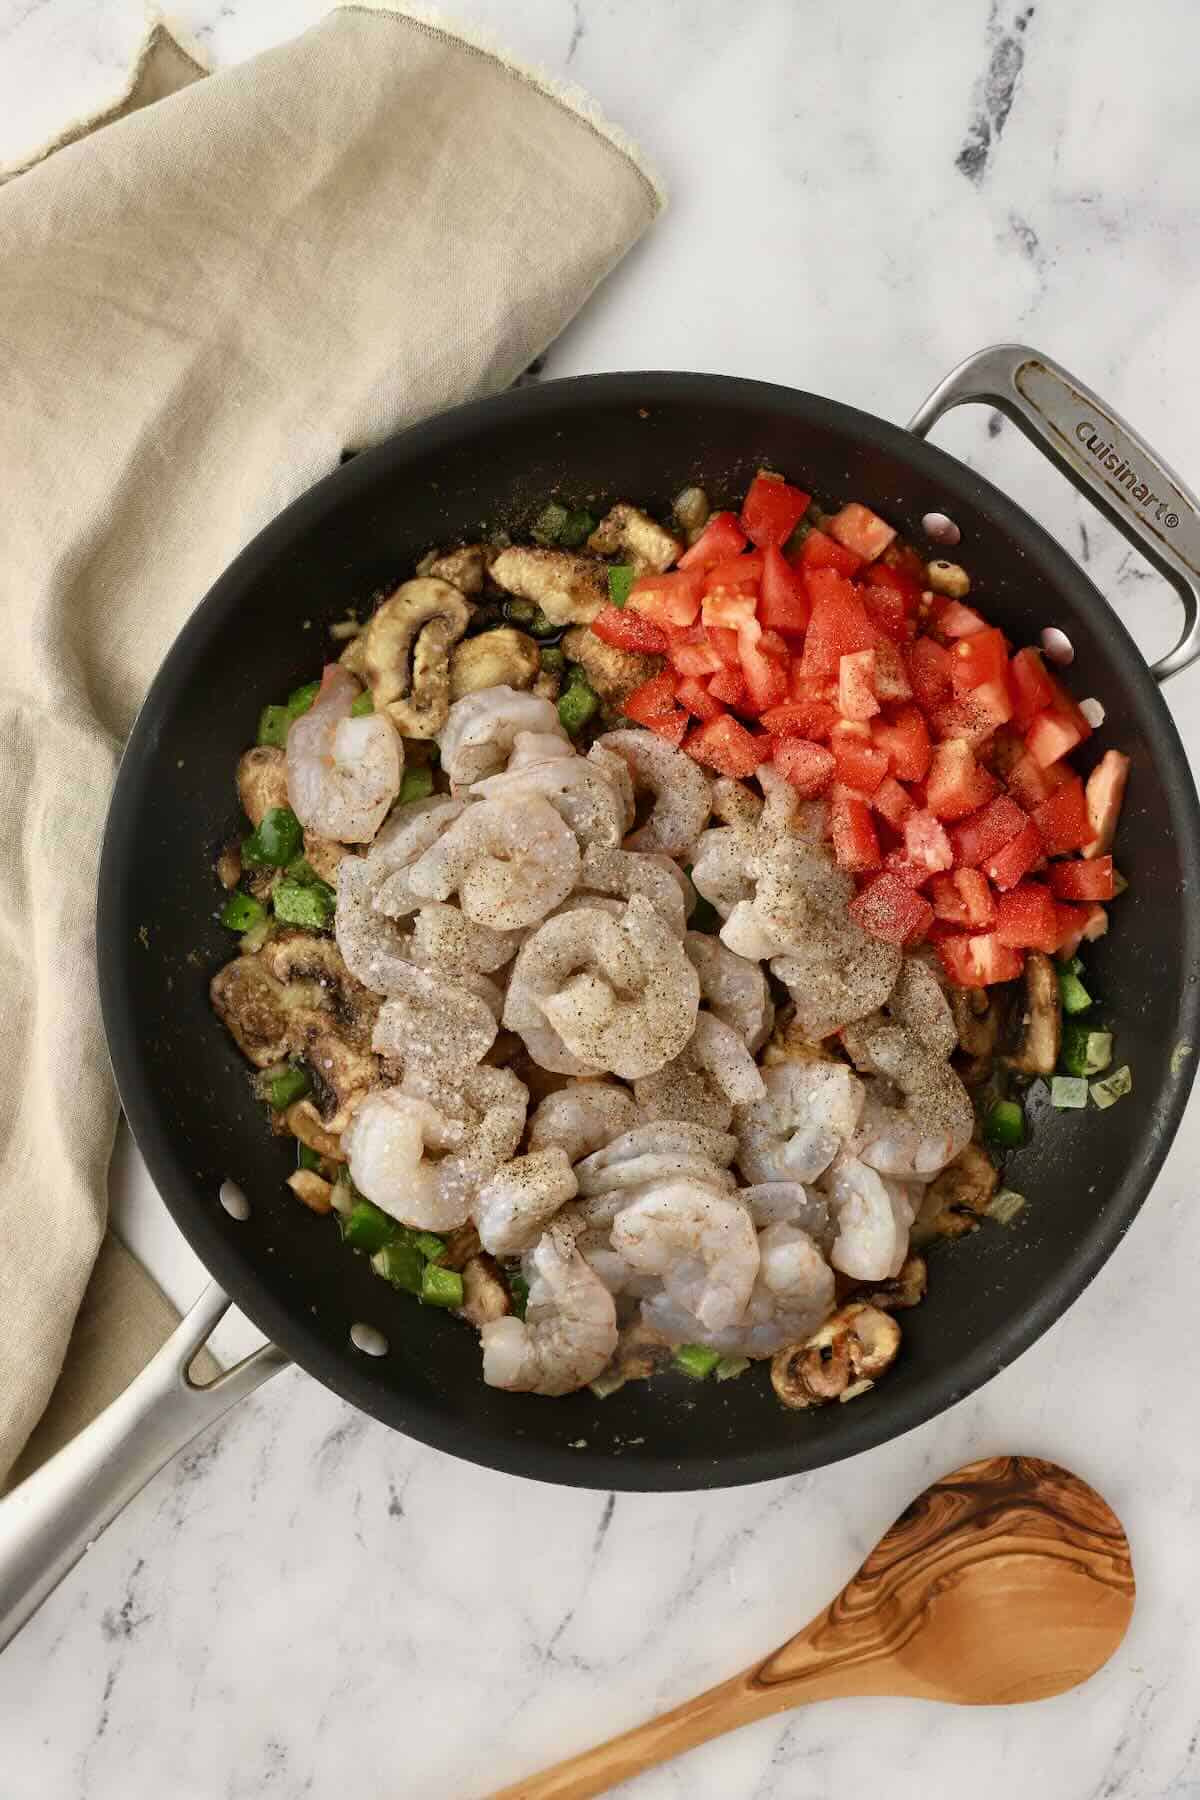 Raw shrimp and chopped tomatoes in a skillet.